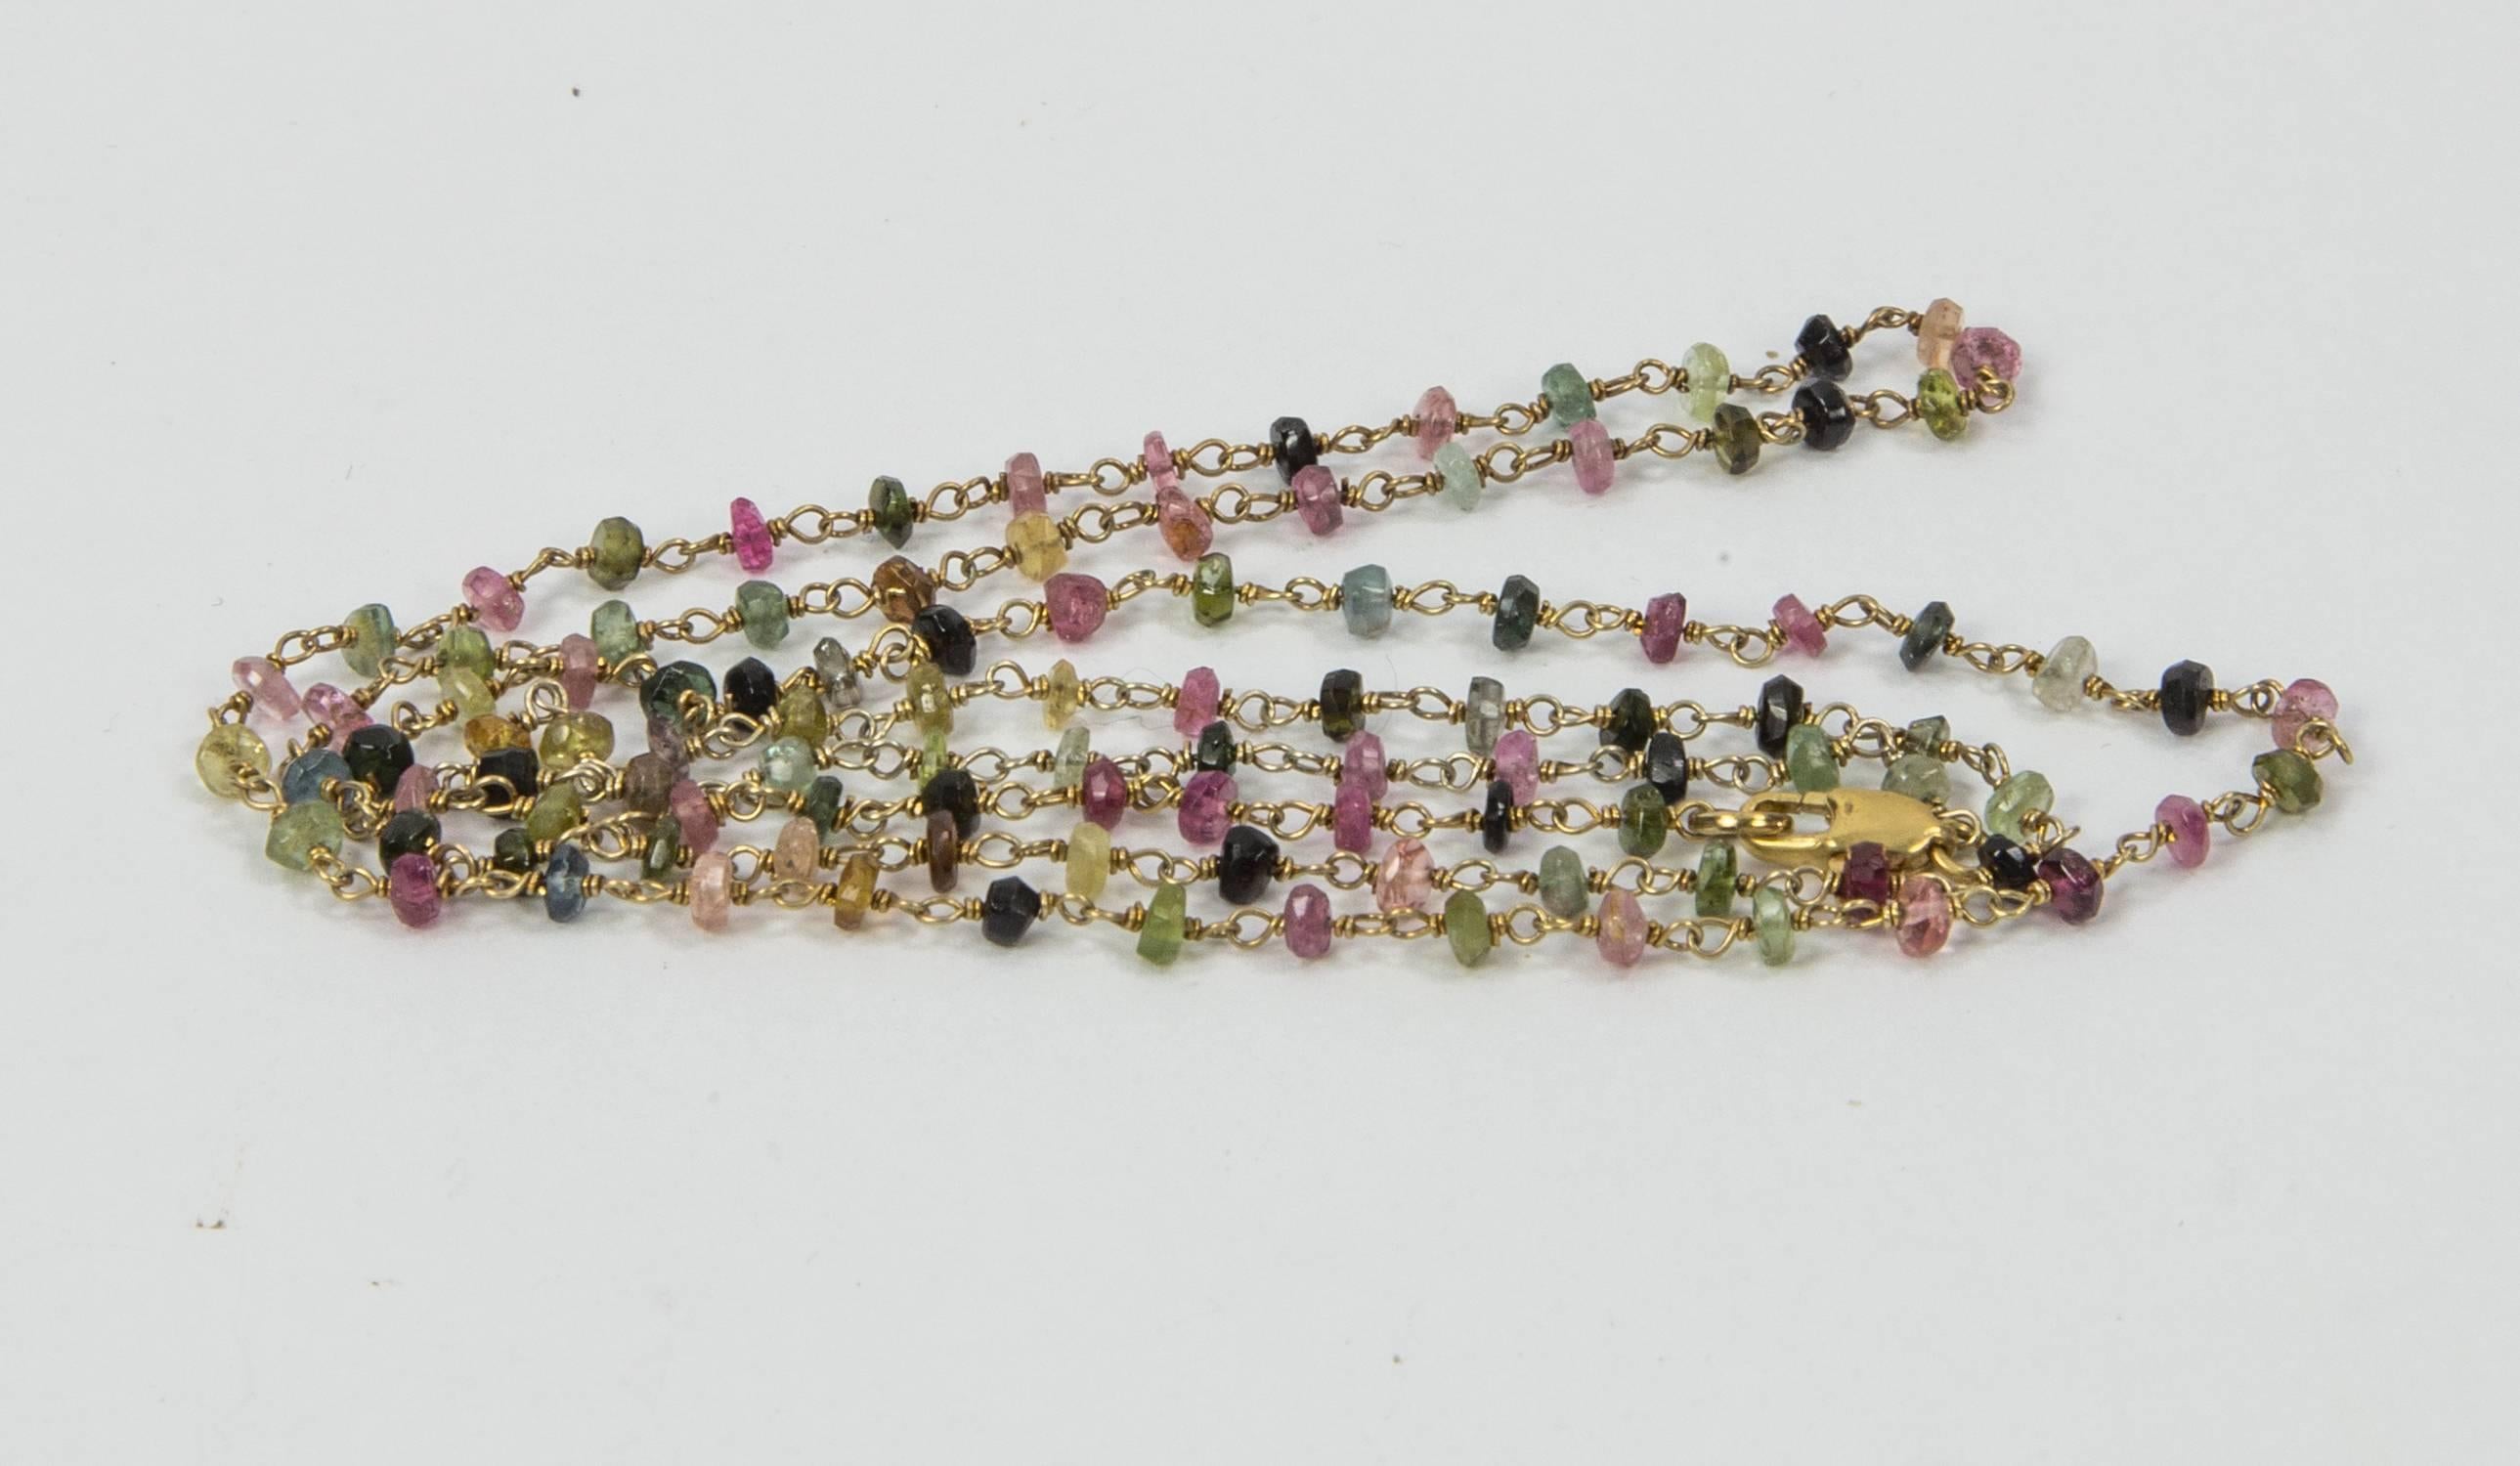 Six Beautiful necklaces designed with multi Tourmaline and vermeil Sterling Silver chain. Hand crafted; varying lengths of 16”-32” long and bead size of approx. 2-3 mm; each necklace held by a lobster claw clasp. Tourmaline are rich in color and of